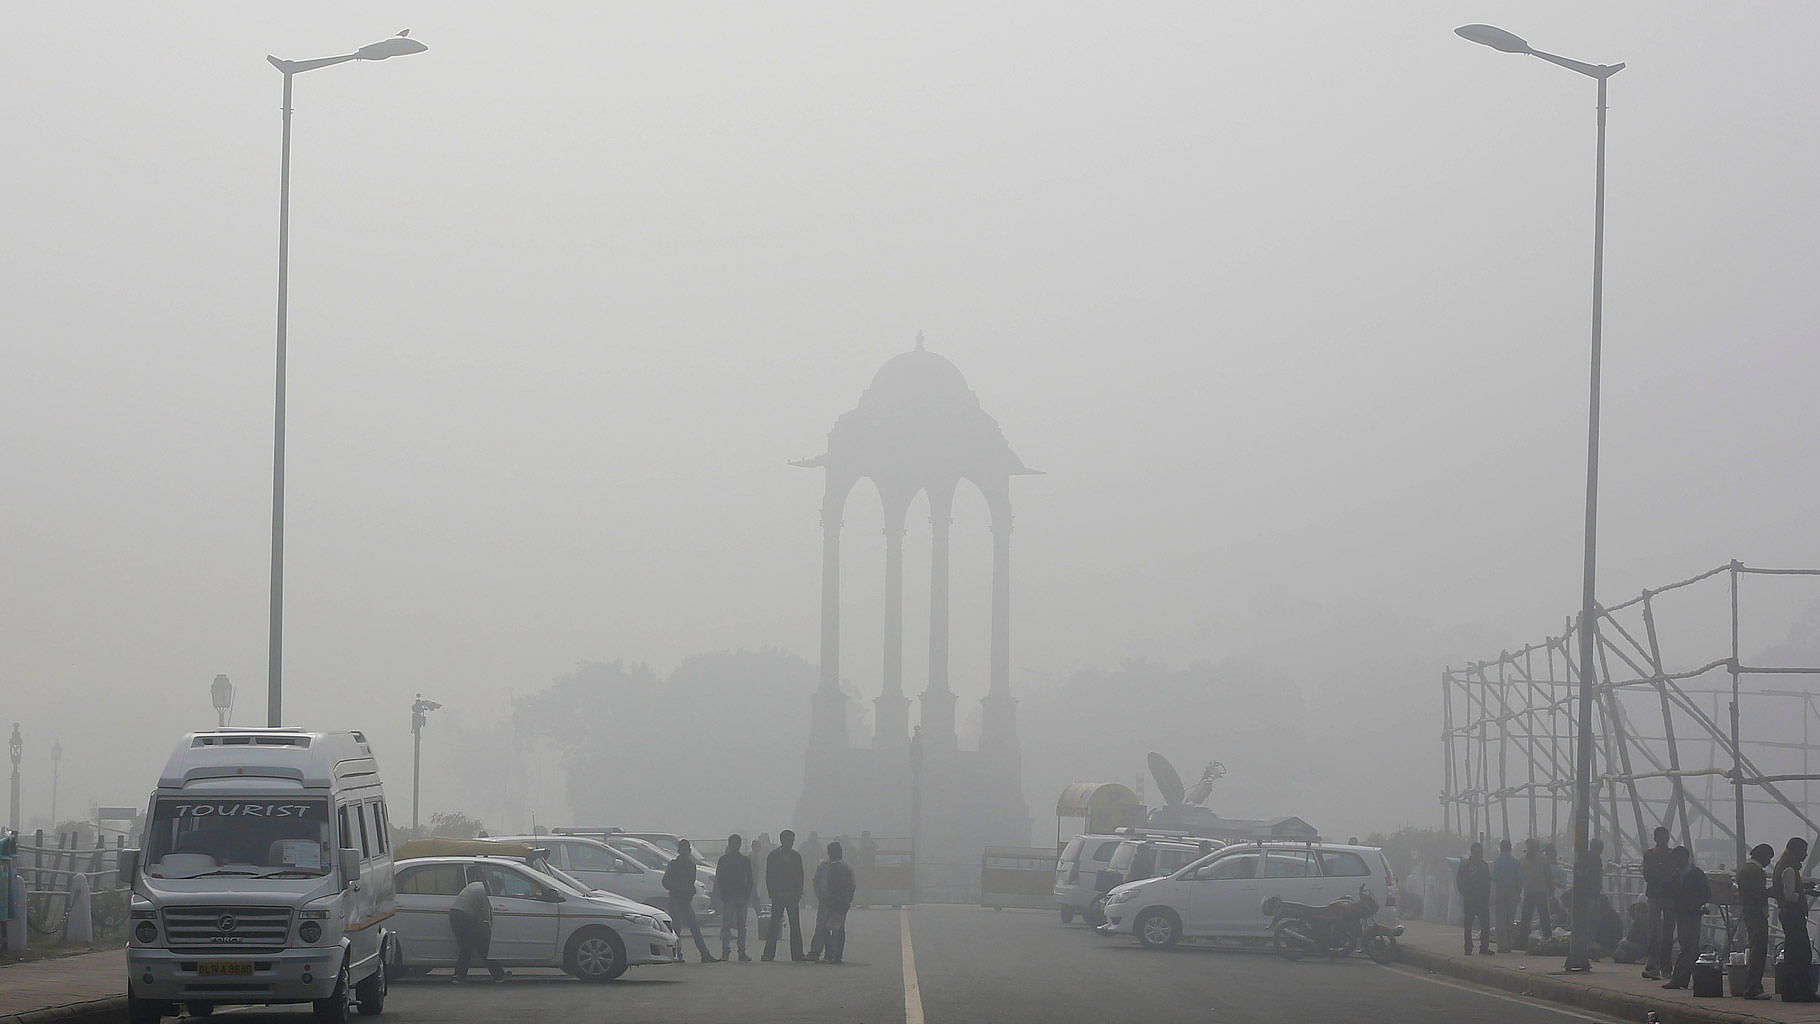 The India Gate war memorial on a smoggy day in New Delhi. (Photo: Reuters)